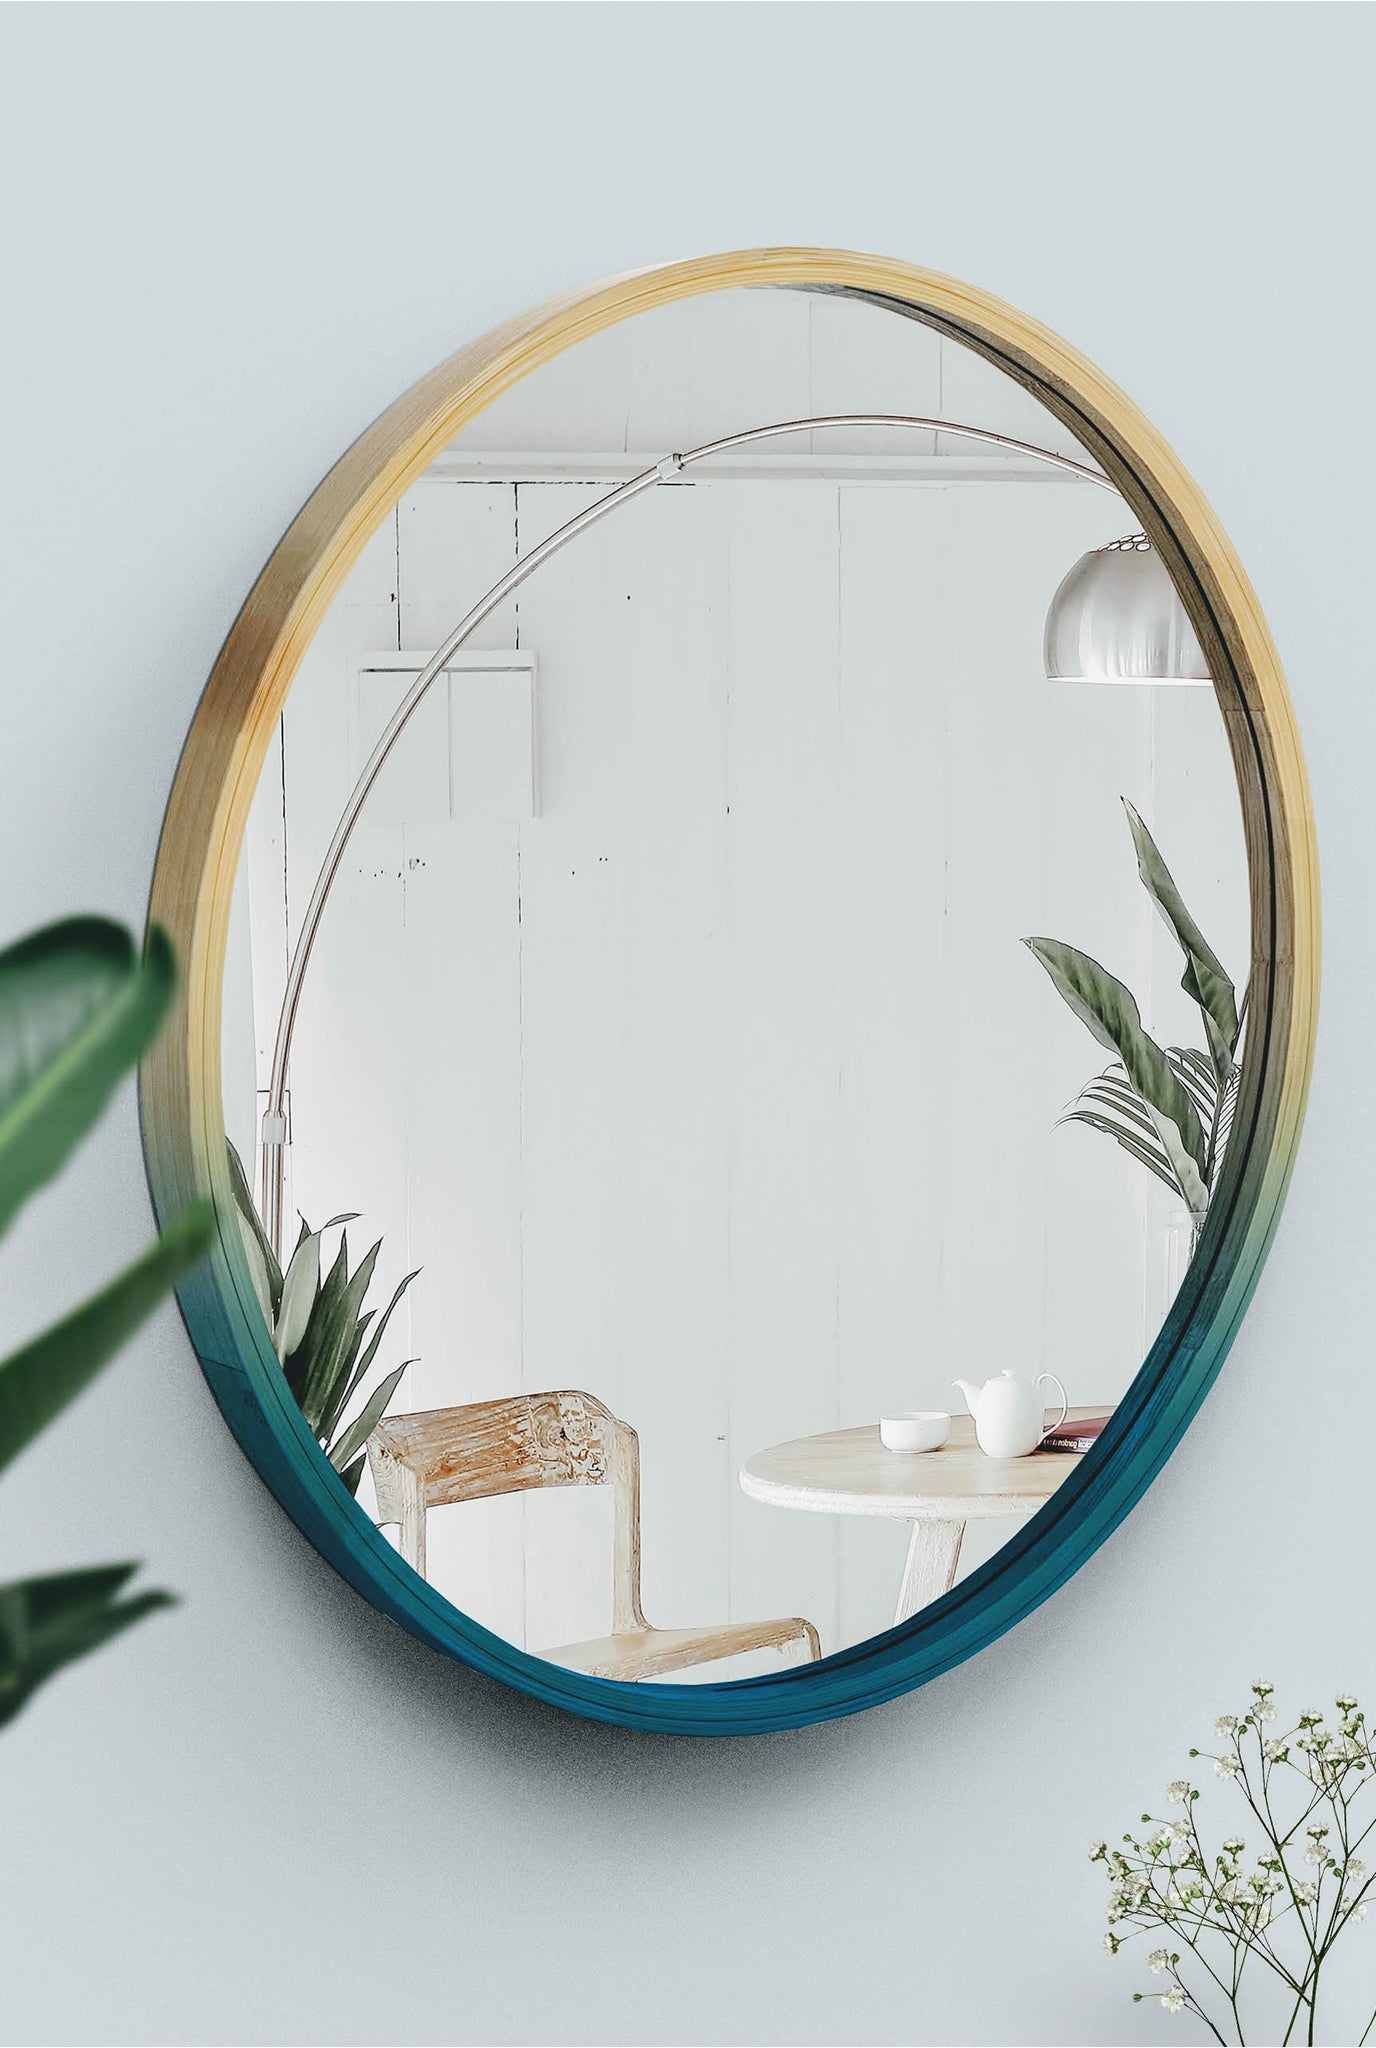 bamboo-frame-handcrafted-mirror-oval-sustainable